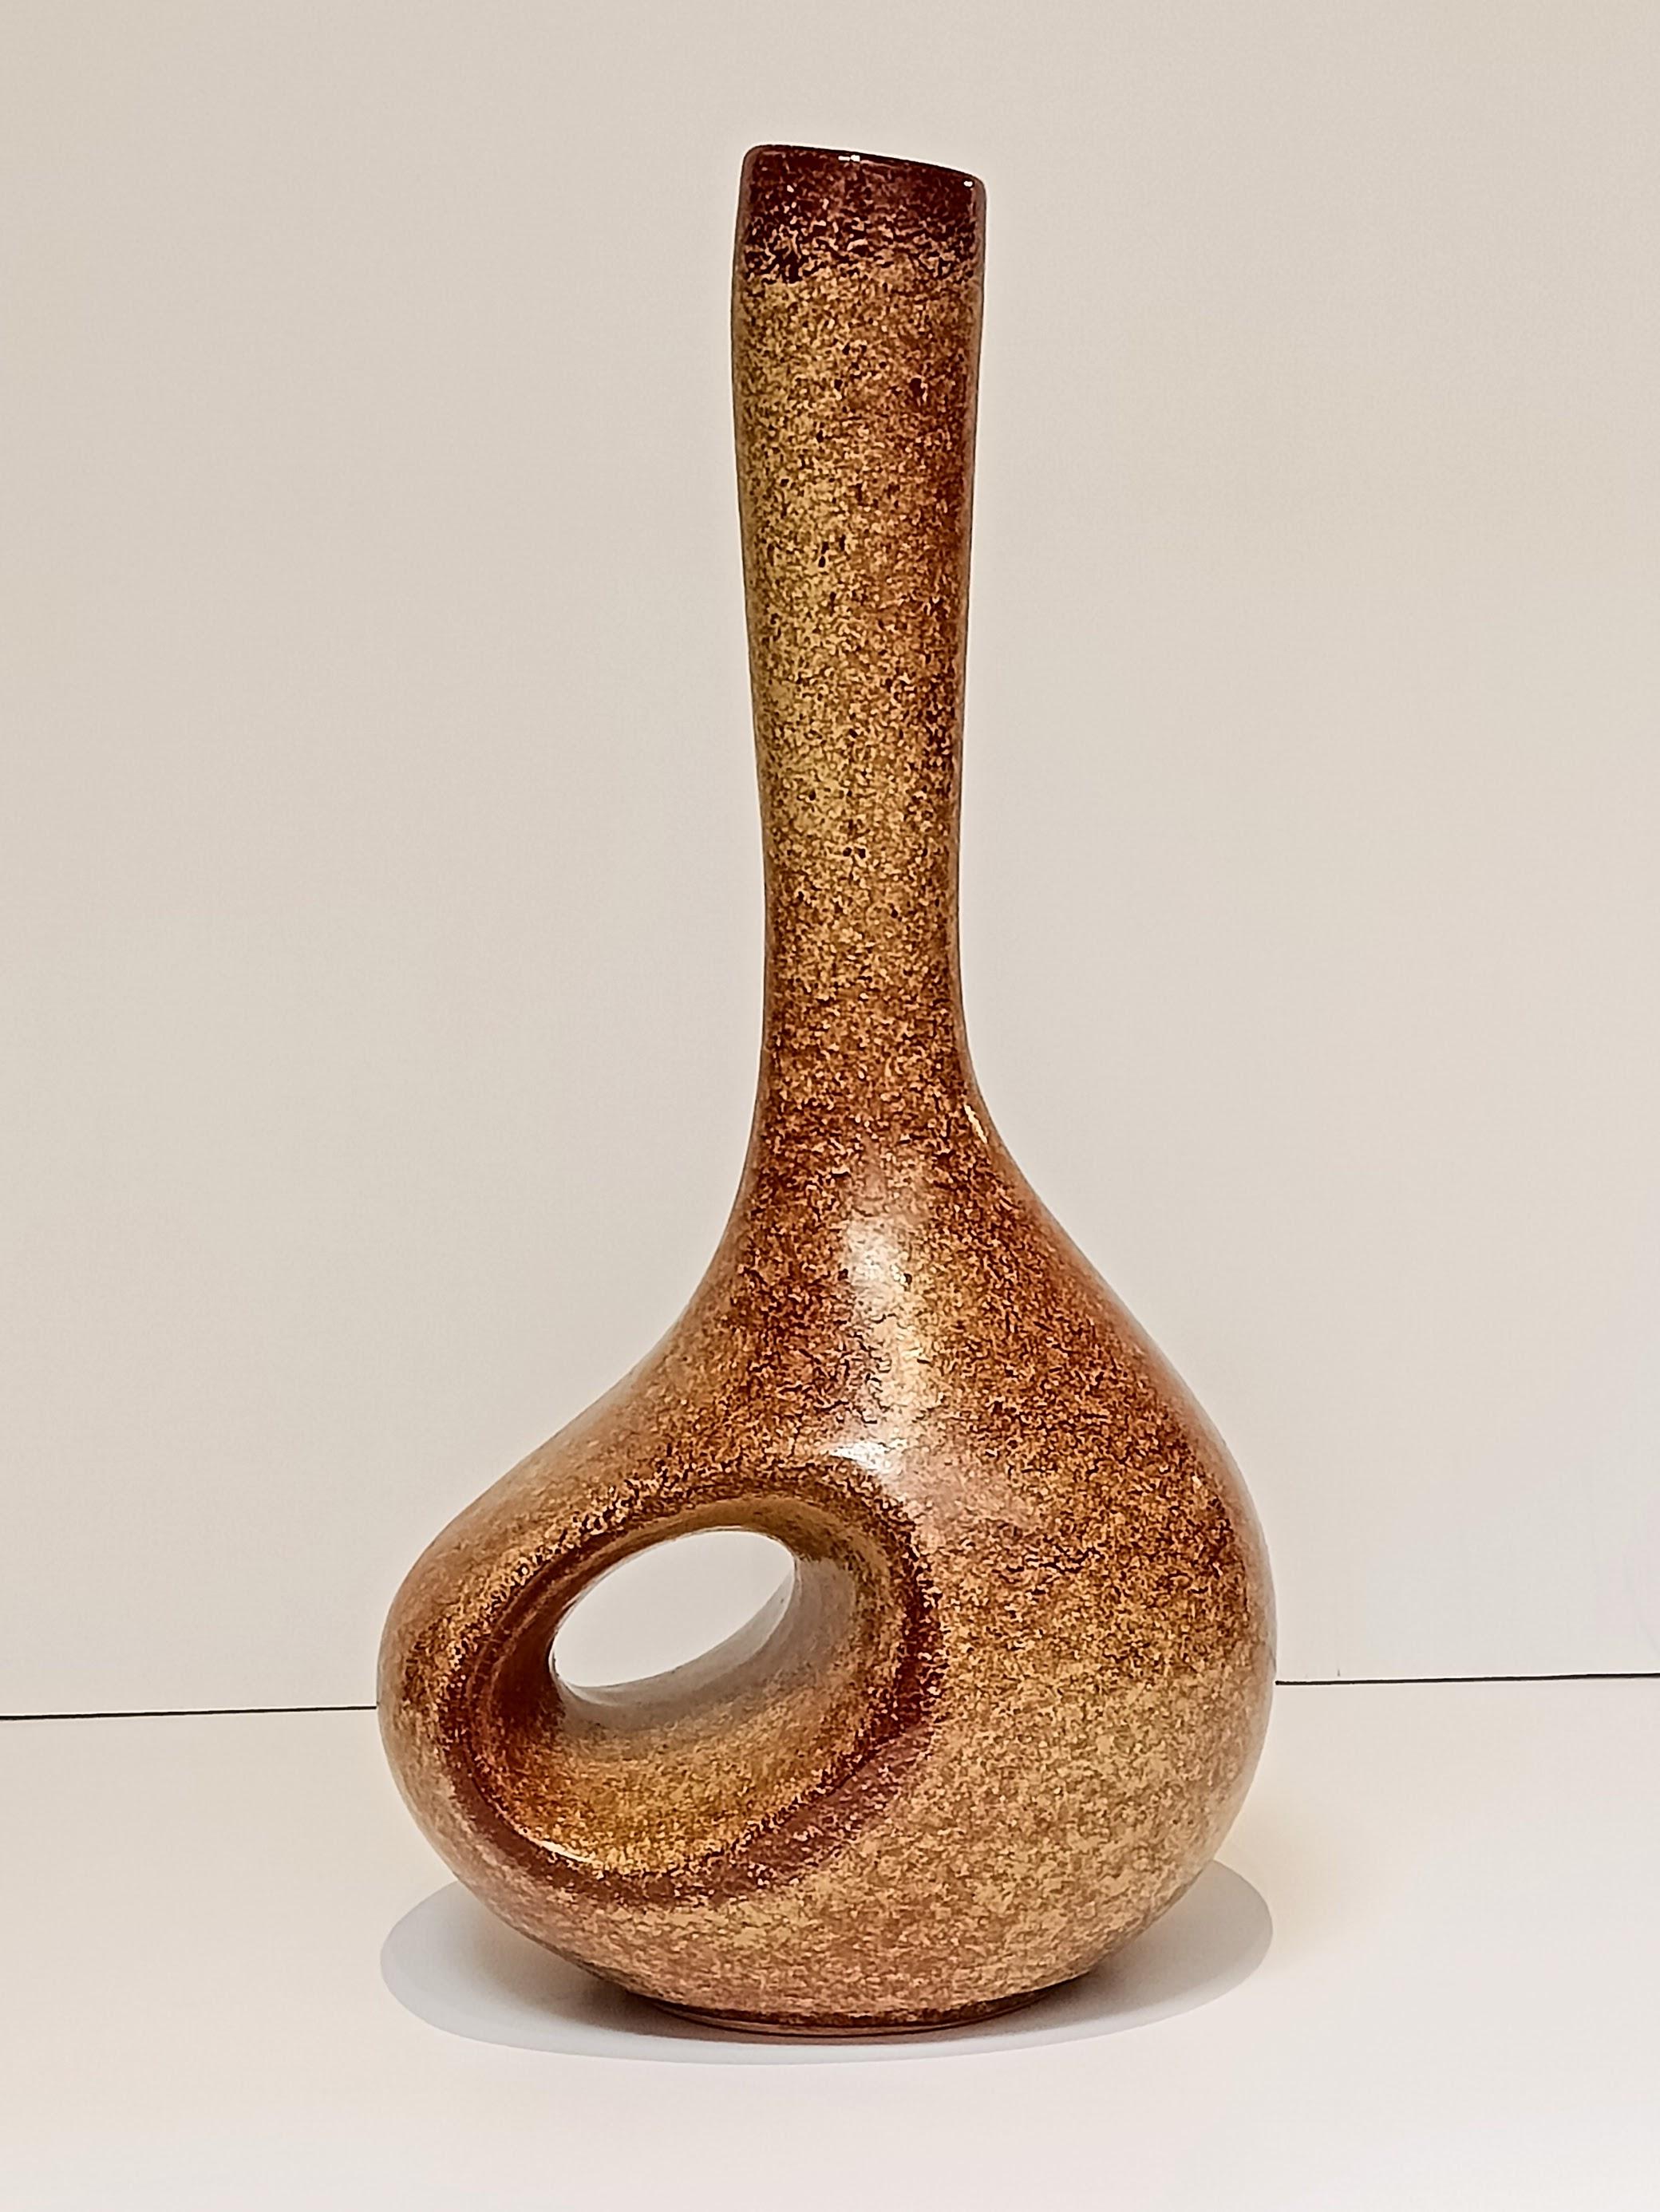 Sculptural Mid Century Modern chimney style ceramic vase by Roberto Rigon for Bertoncello Ceramiche. Featuring the Tobacco classic mottled tan color, this beautifully designed piece is marked with a code number and was  hand produced in Vicenza,